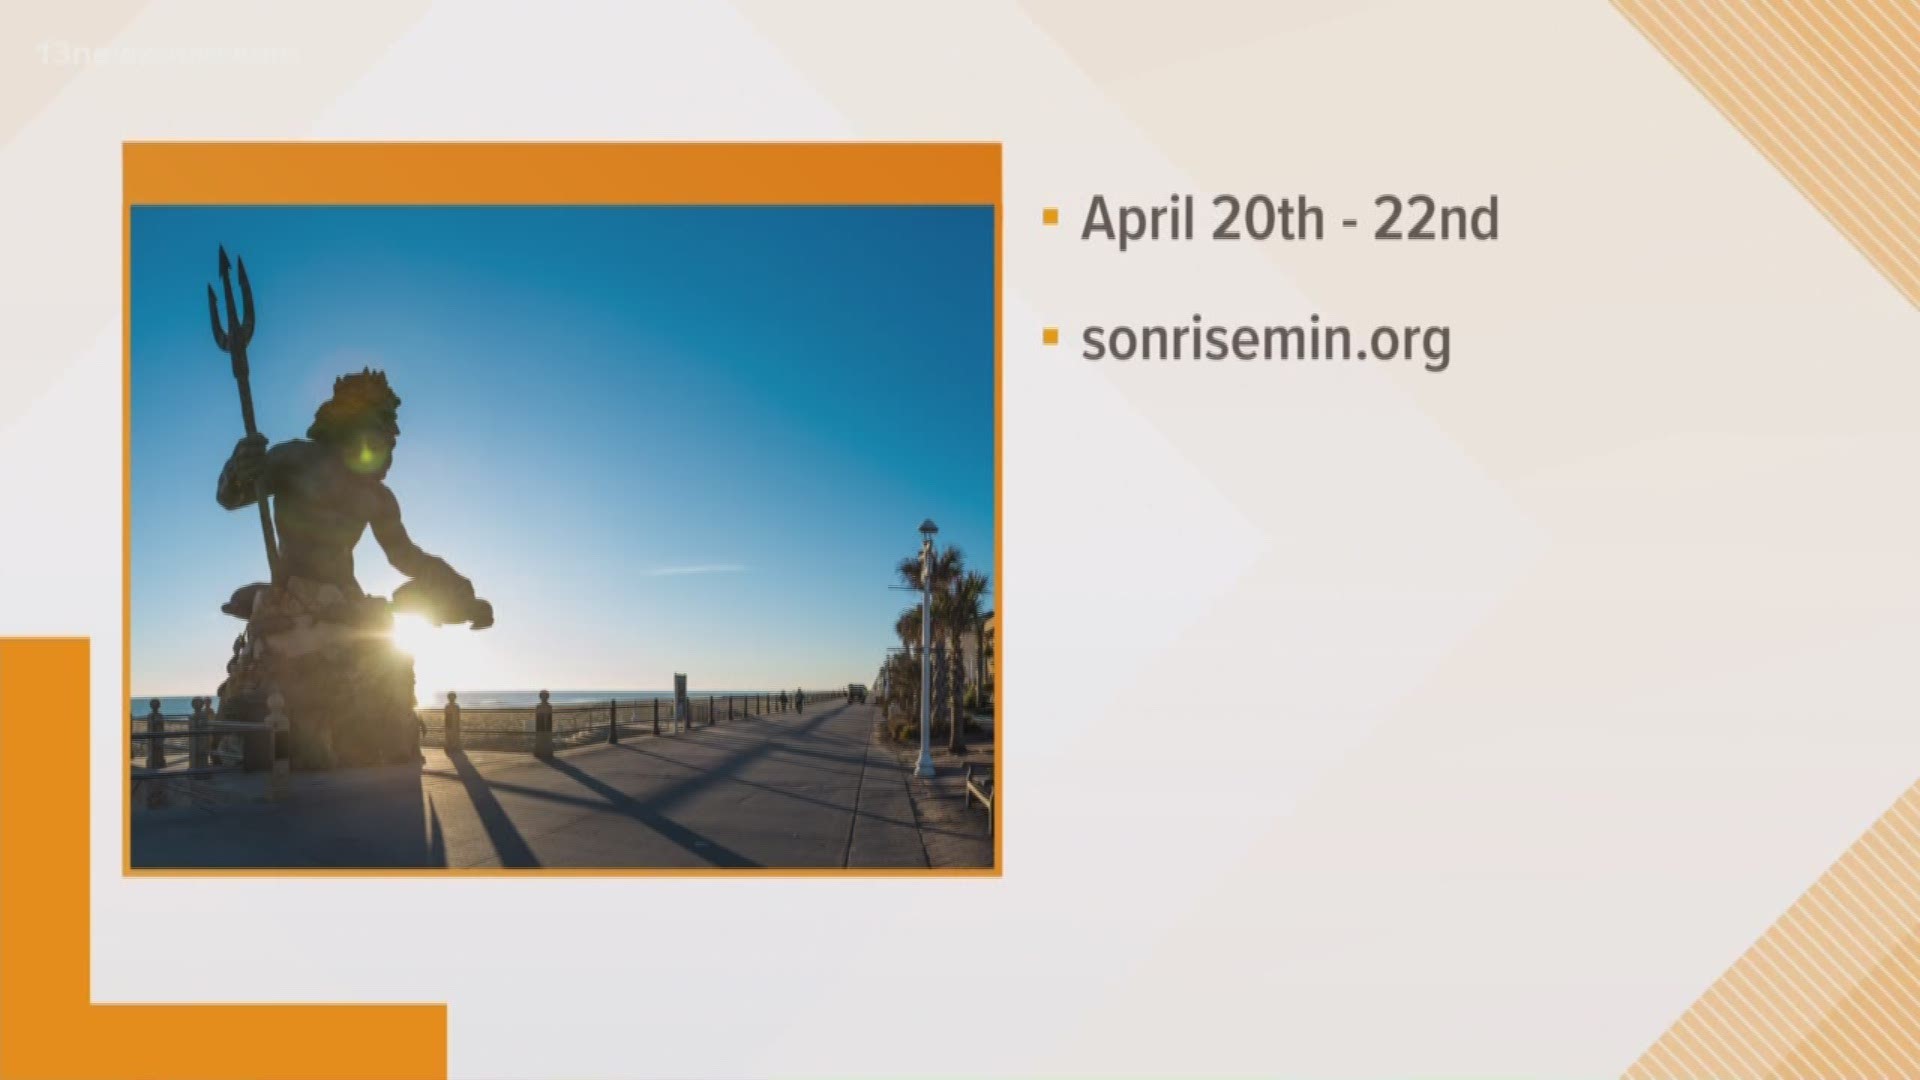 The fifth annual SonRise Music Festival offers 'positive/alternative' family-friendly music on the beach and in the sand. General admission to concerts and activities is free.